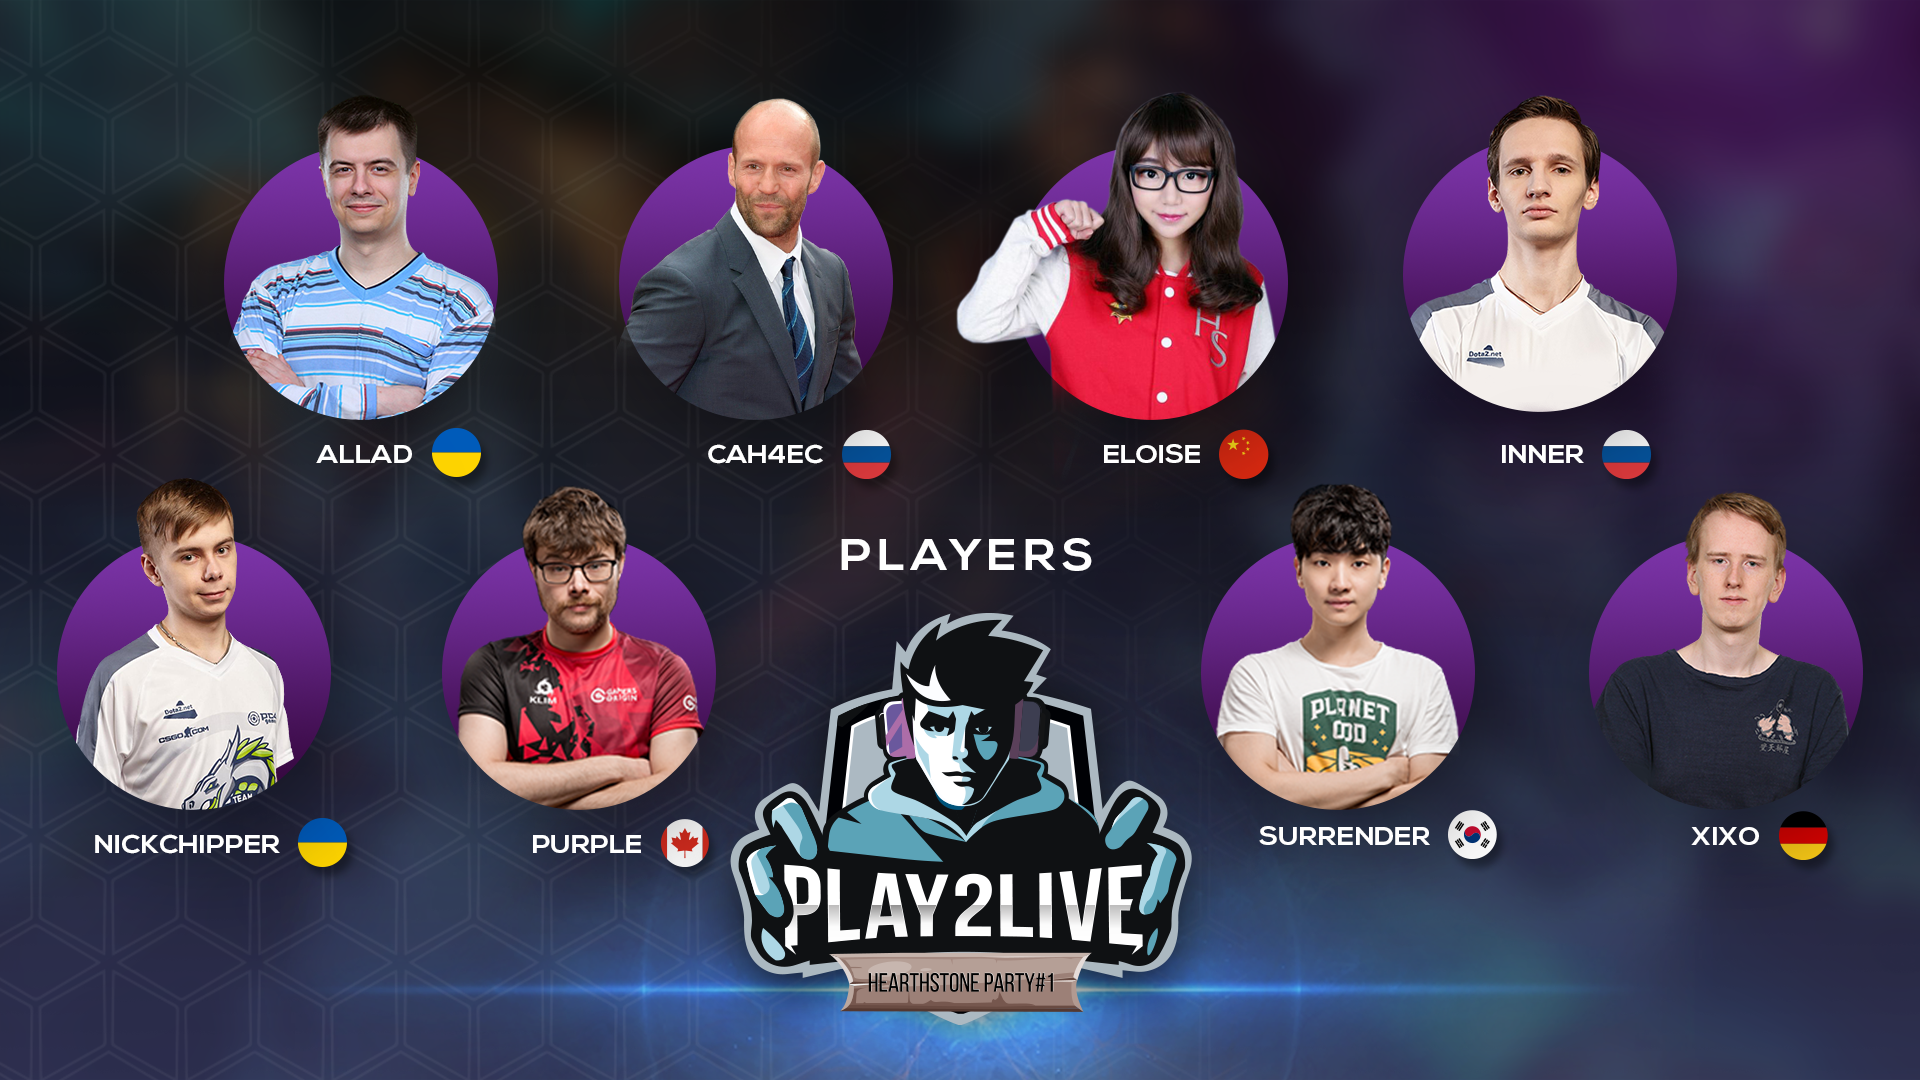 Play2Live Hosts a Grand Hearthstone Tournament by Play2Live Medium